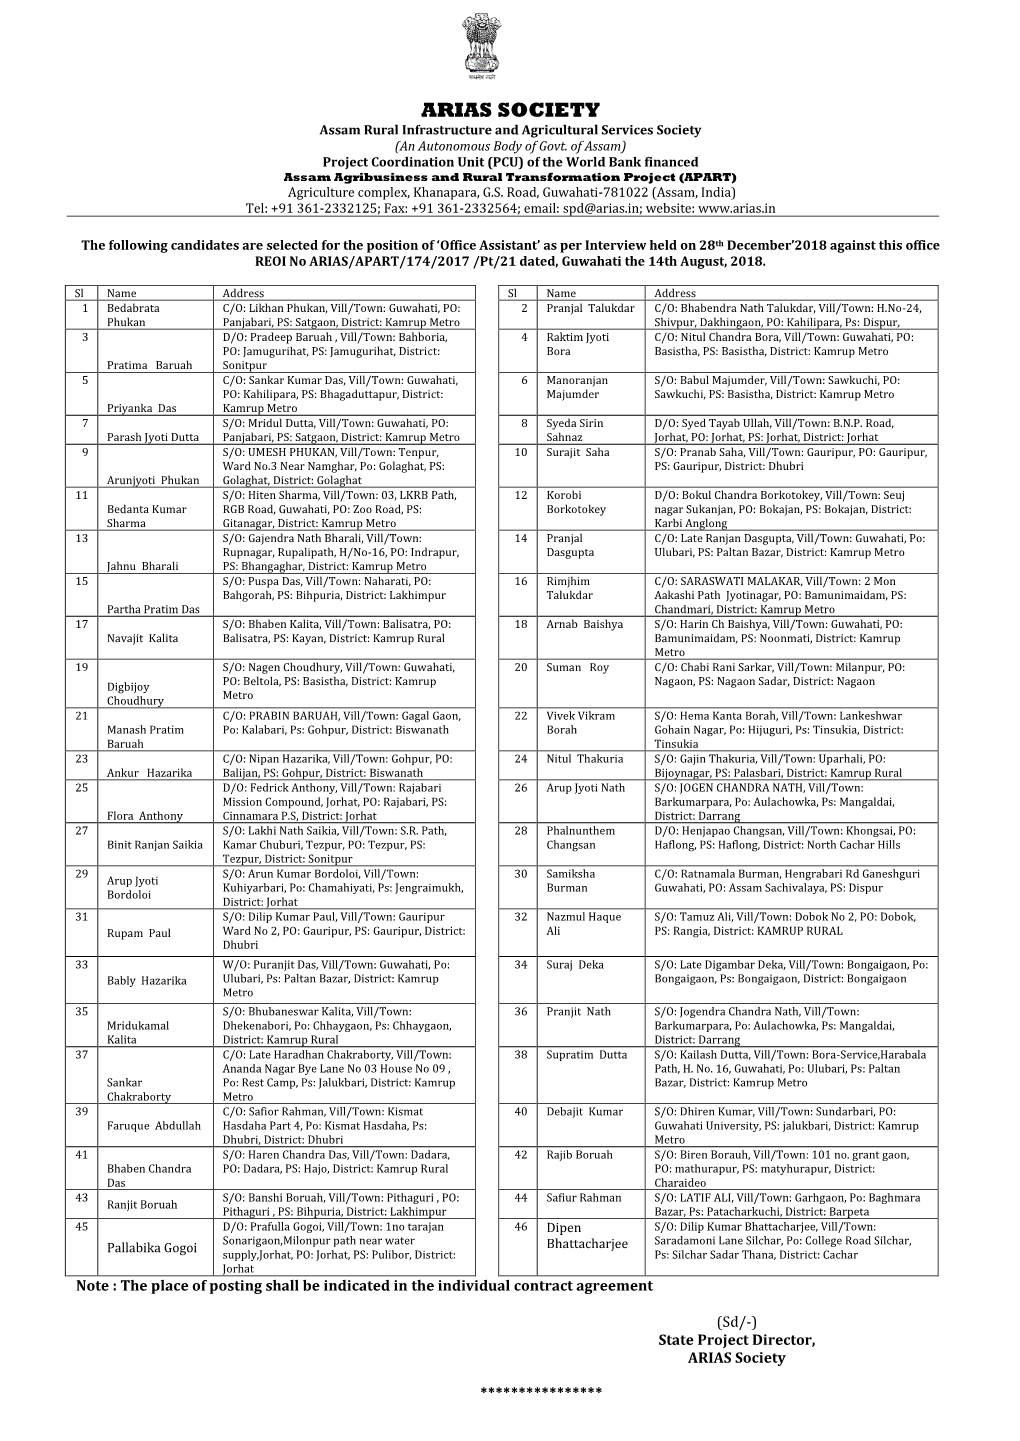 APART-List of Selected Candidates for the Position of Office Assistant Under the World Bank Financed